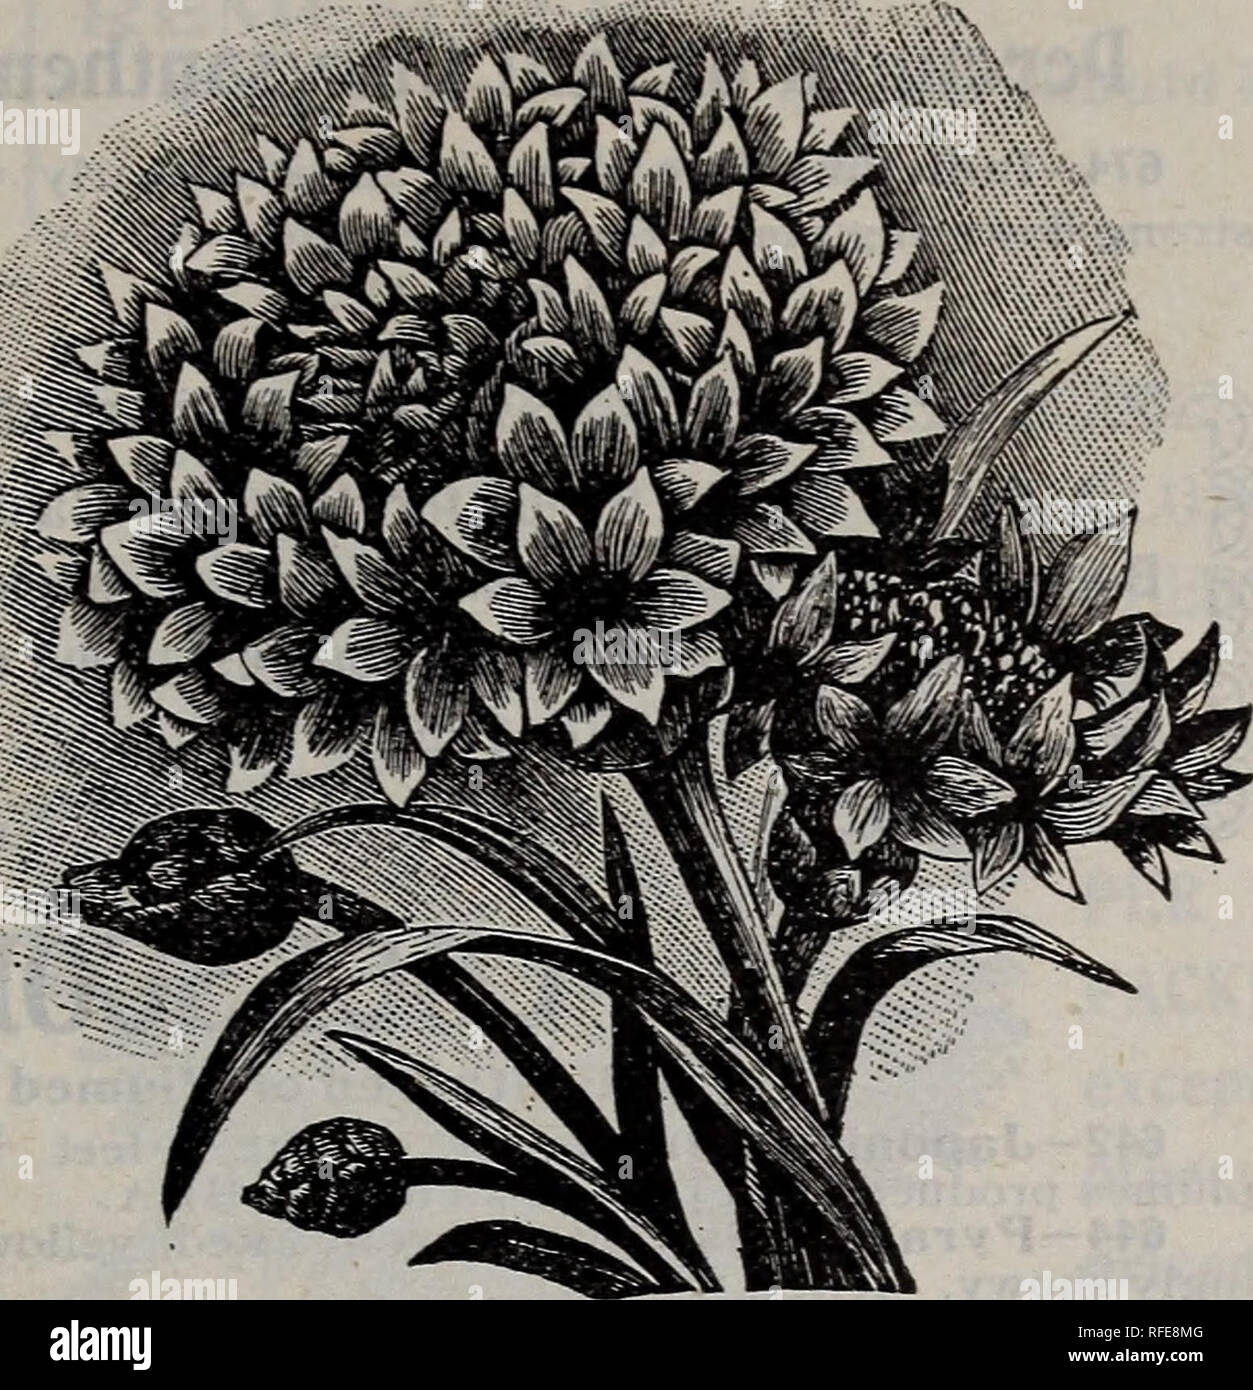 . 1902 catalog : pure &amp; sure seeds. Nursery stock Missouri Catalogs; Seeds Catalogs; Vegetables Seeds Catalogs; Flowers Seeds Catalogs. CENTAUREA (Corn Flower, Corn Bottle or Bachelor's Button) 652—Cyanus, single, mixed. Yery free bloomer. A popular flower for cutting. Bunched with Sweet Peas it is very effective. 1V2 feet. HA. Ounce, 20c. 654 — Cyanus, double, mixed (Double Corn Flow- er^ As shown in the illus- tration, the flowers are large in size, and more double than No. 652. This strain produces a wide range of colors and some new shades. 656—Cyanus, Emperor William. Rich, deep blue  Stock Photo